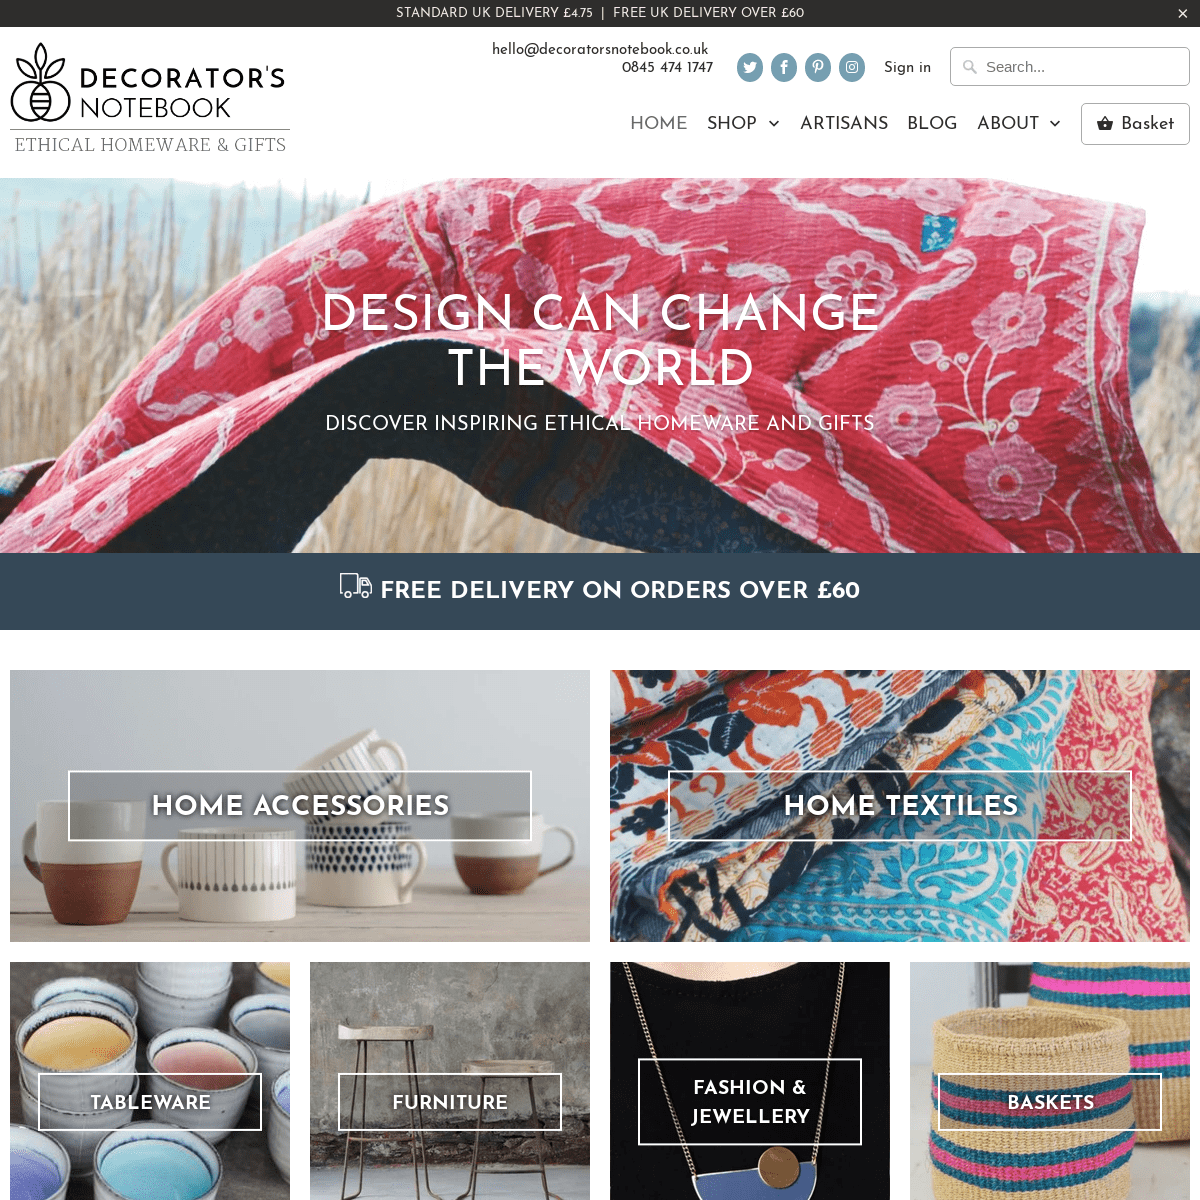 DECORATOR'S NOTEBOOK ethical homeware and gifts to buy online